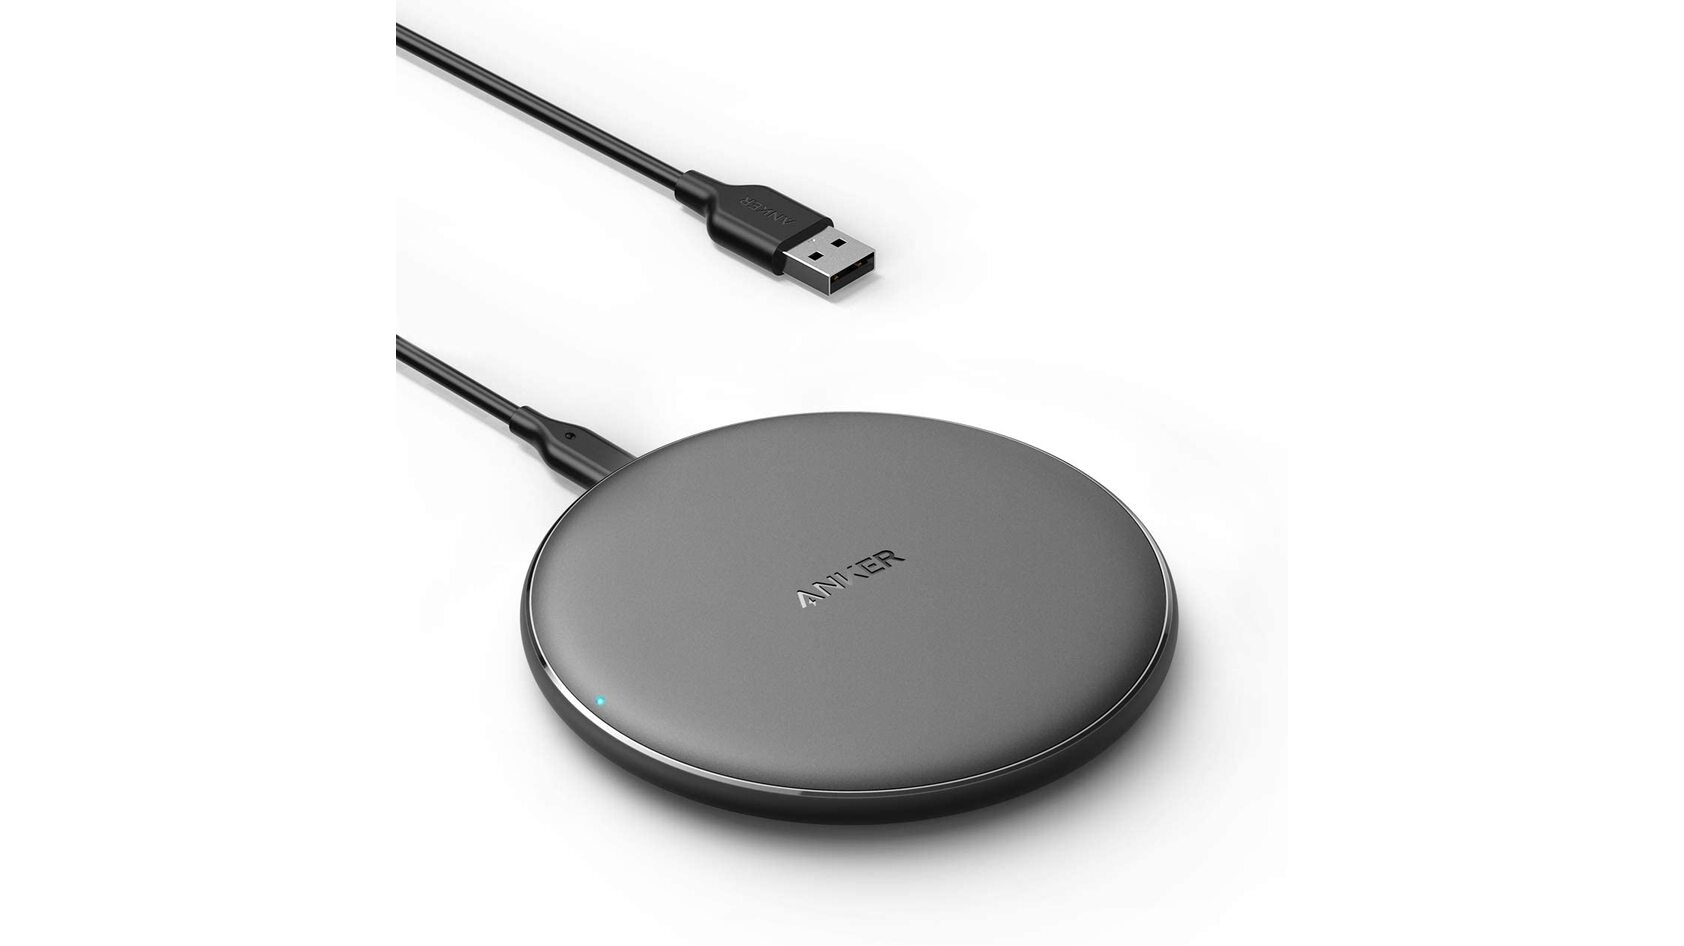 Product image for the Anker PowerPad Wireless charger